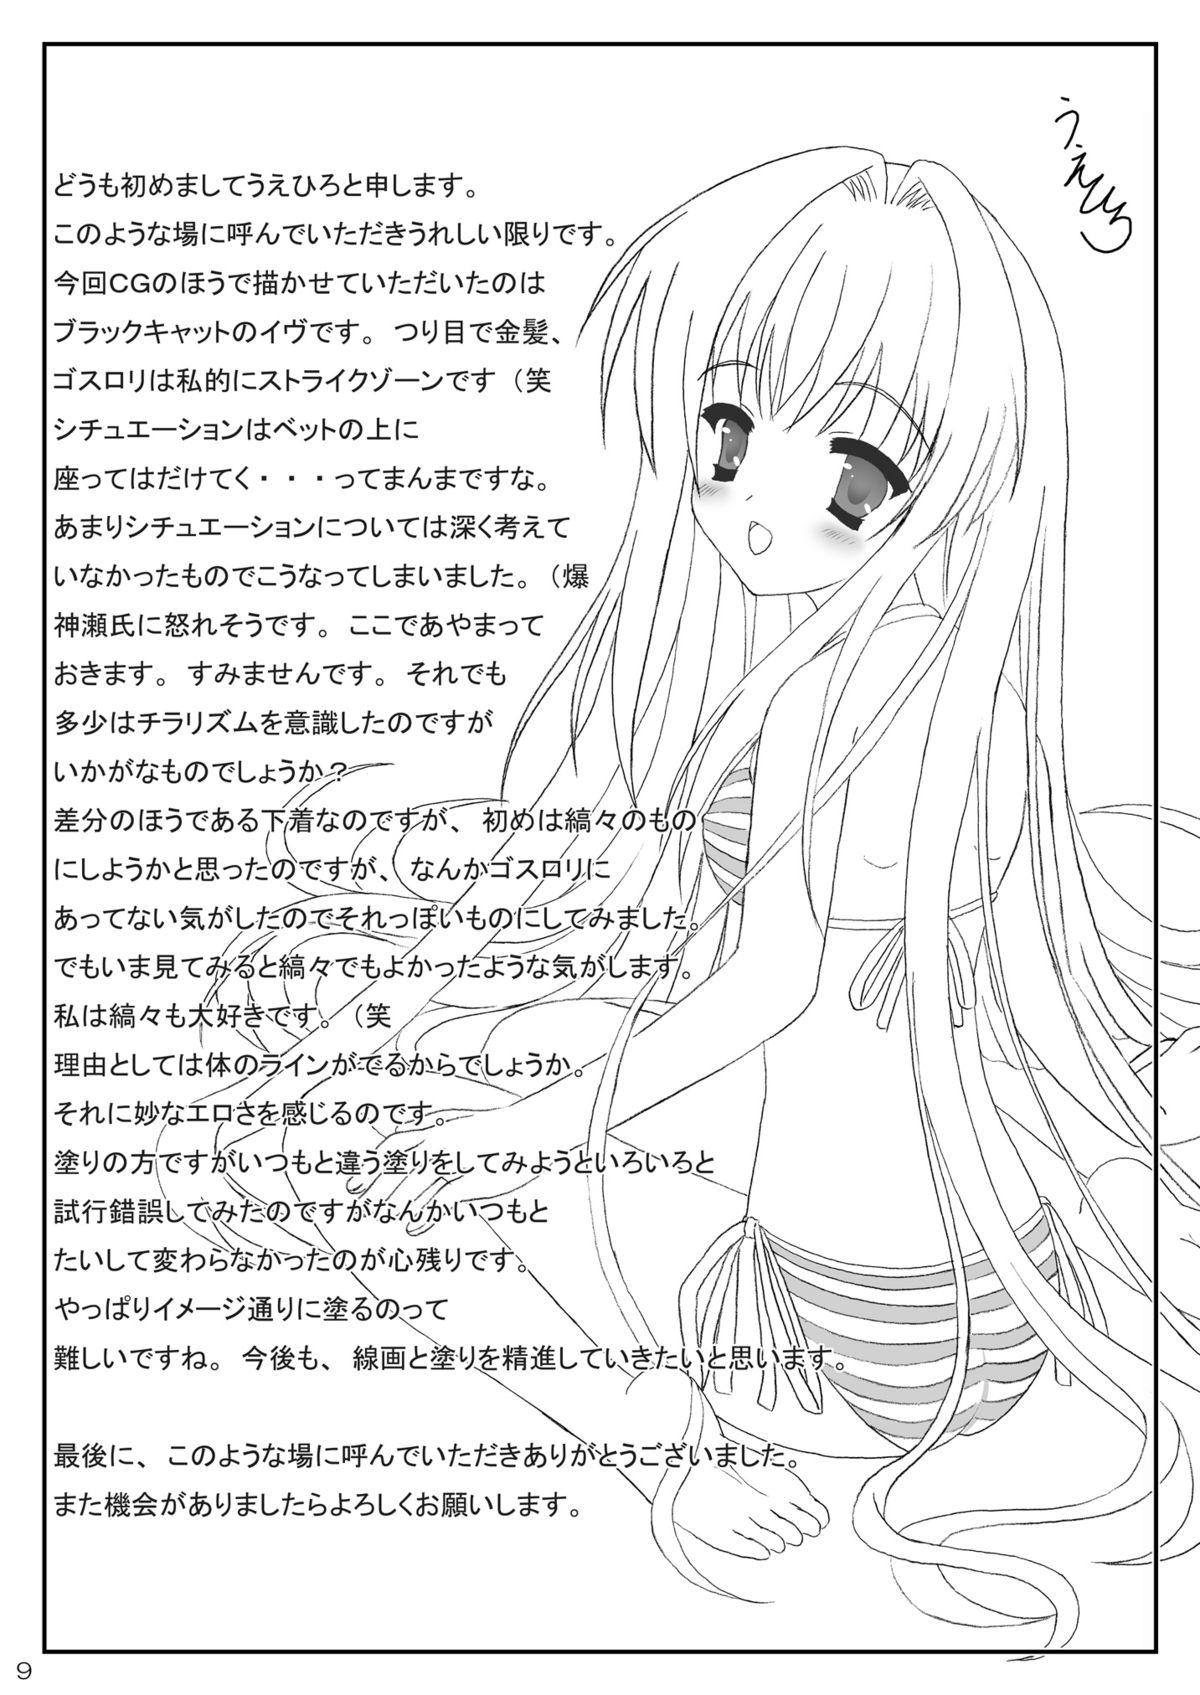 Monster Cock Situation Maniacs vol.0.5 Omake Hon - Fate stay night Great Fuck - Page 14